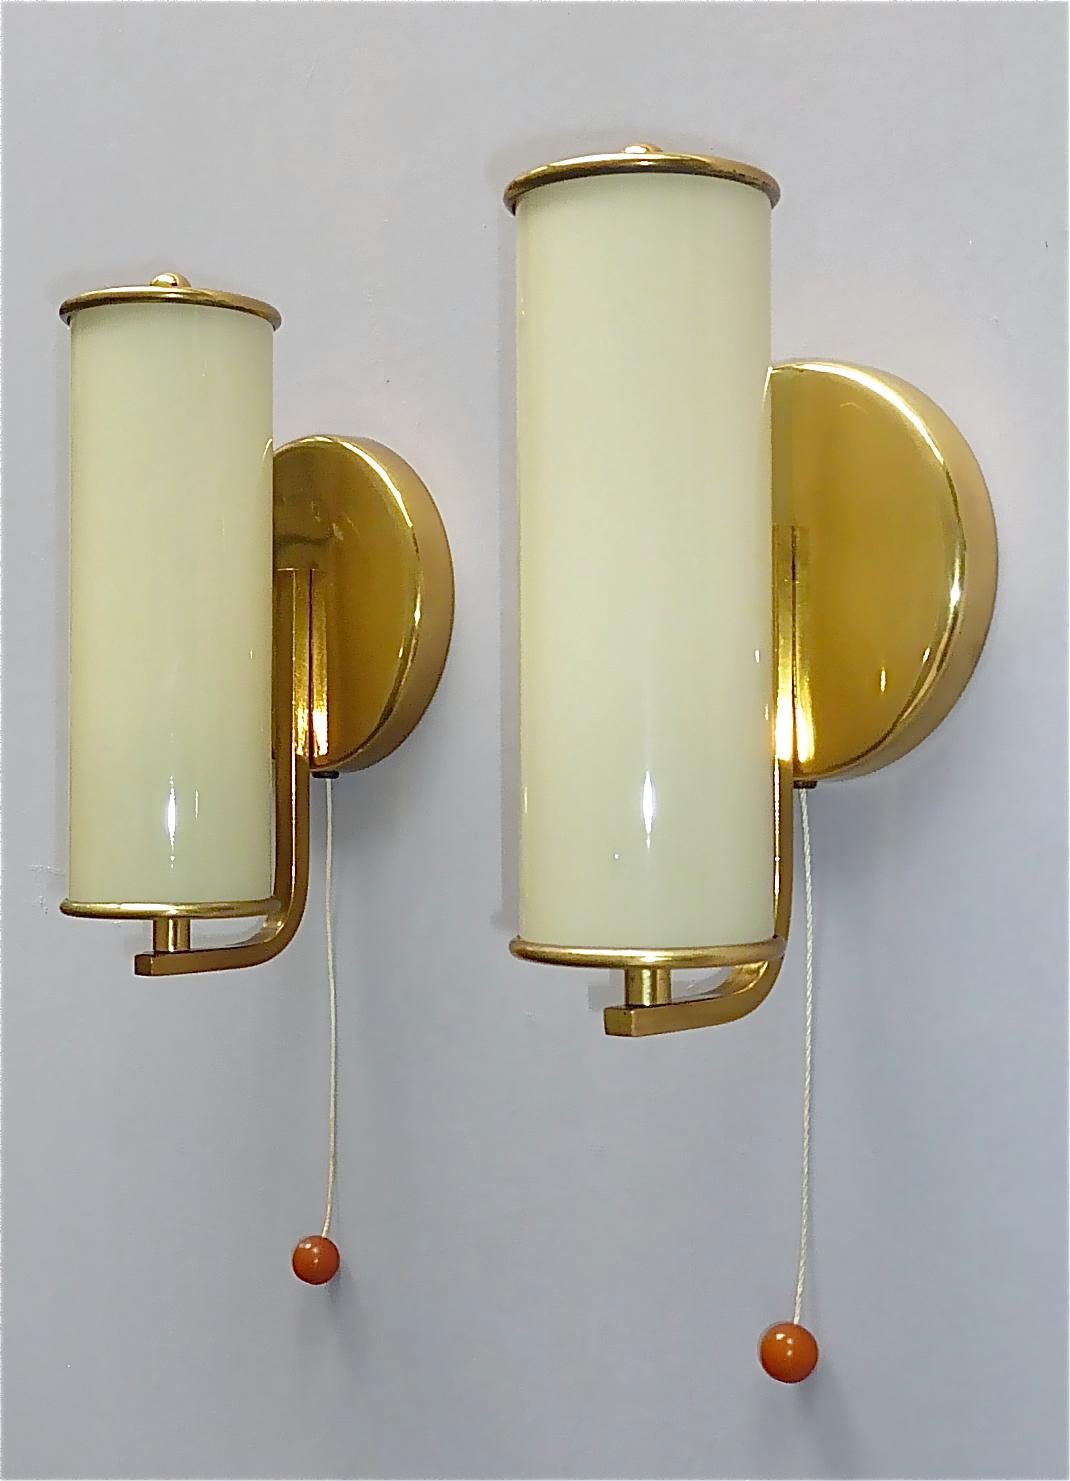 Patinated Pair Modernist Bauhaus Sconces Tynell Style Brass Yellow Tube Glass Shades 1930s